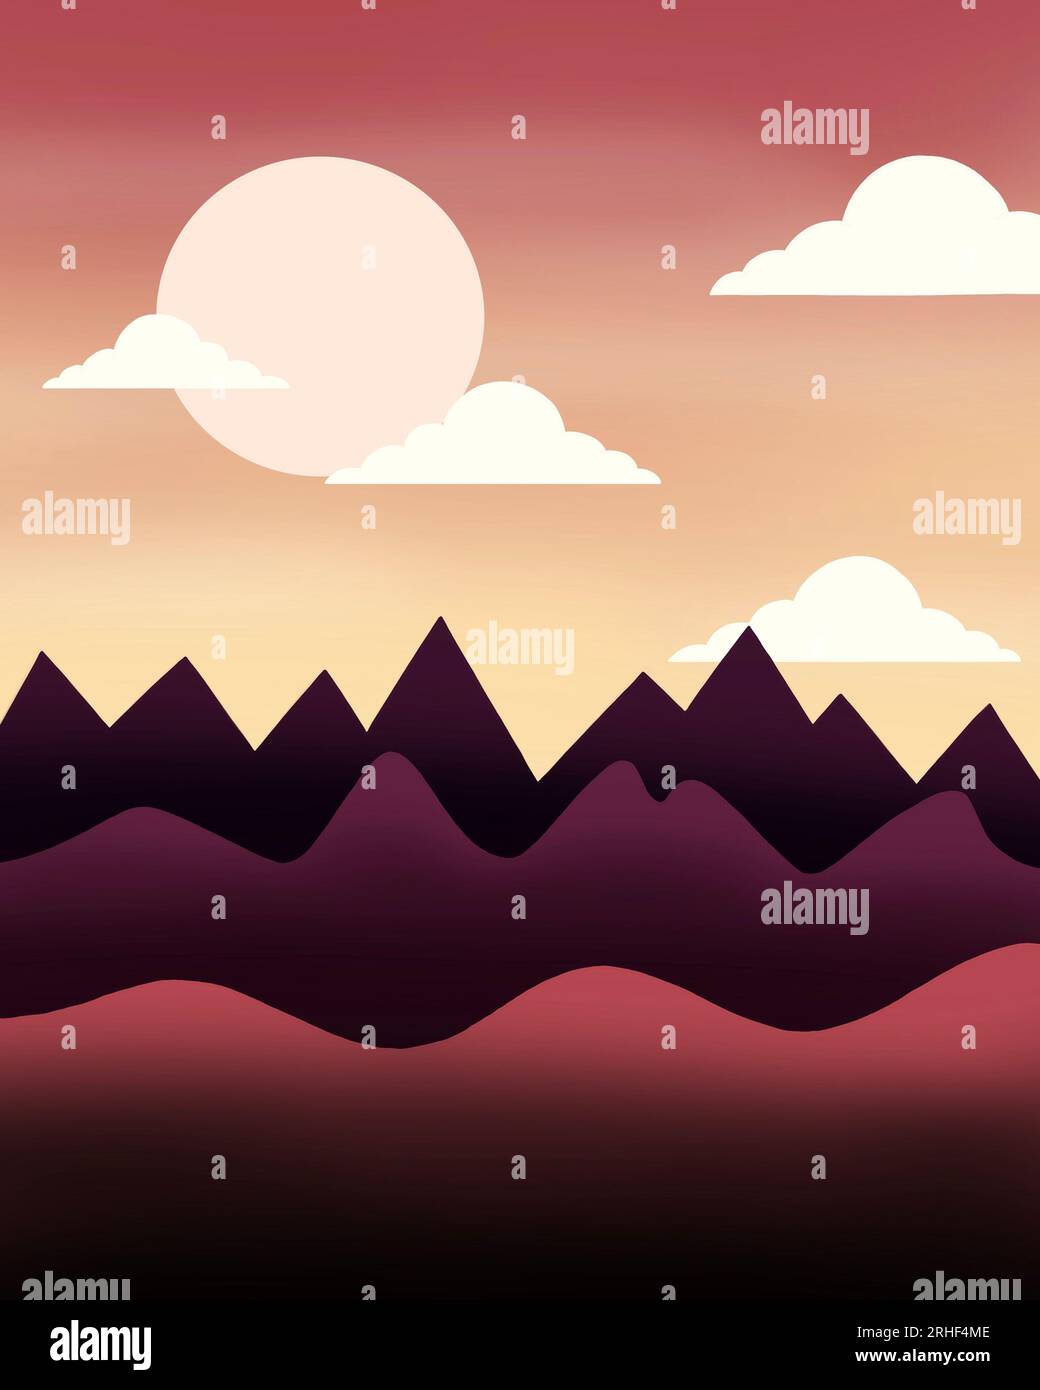 Abstract Cartoon Drawing of Mountains and Hills at Sunset. Stock Photo